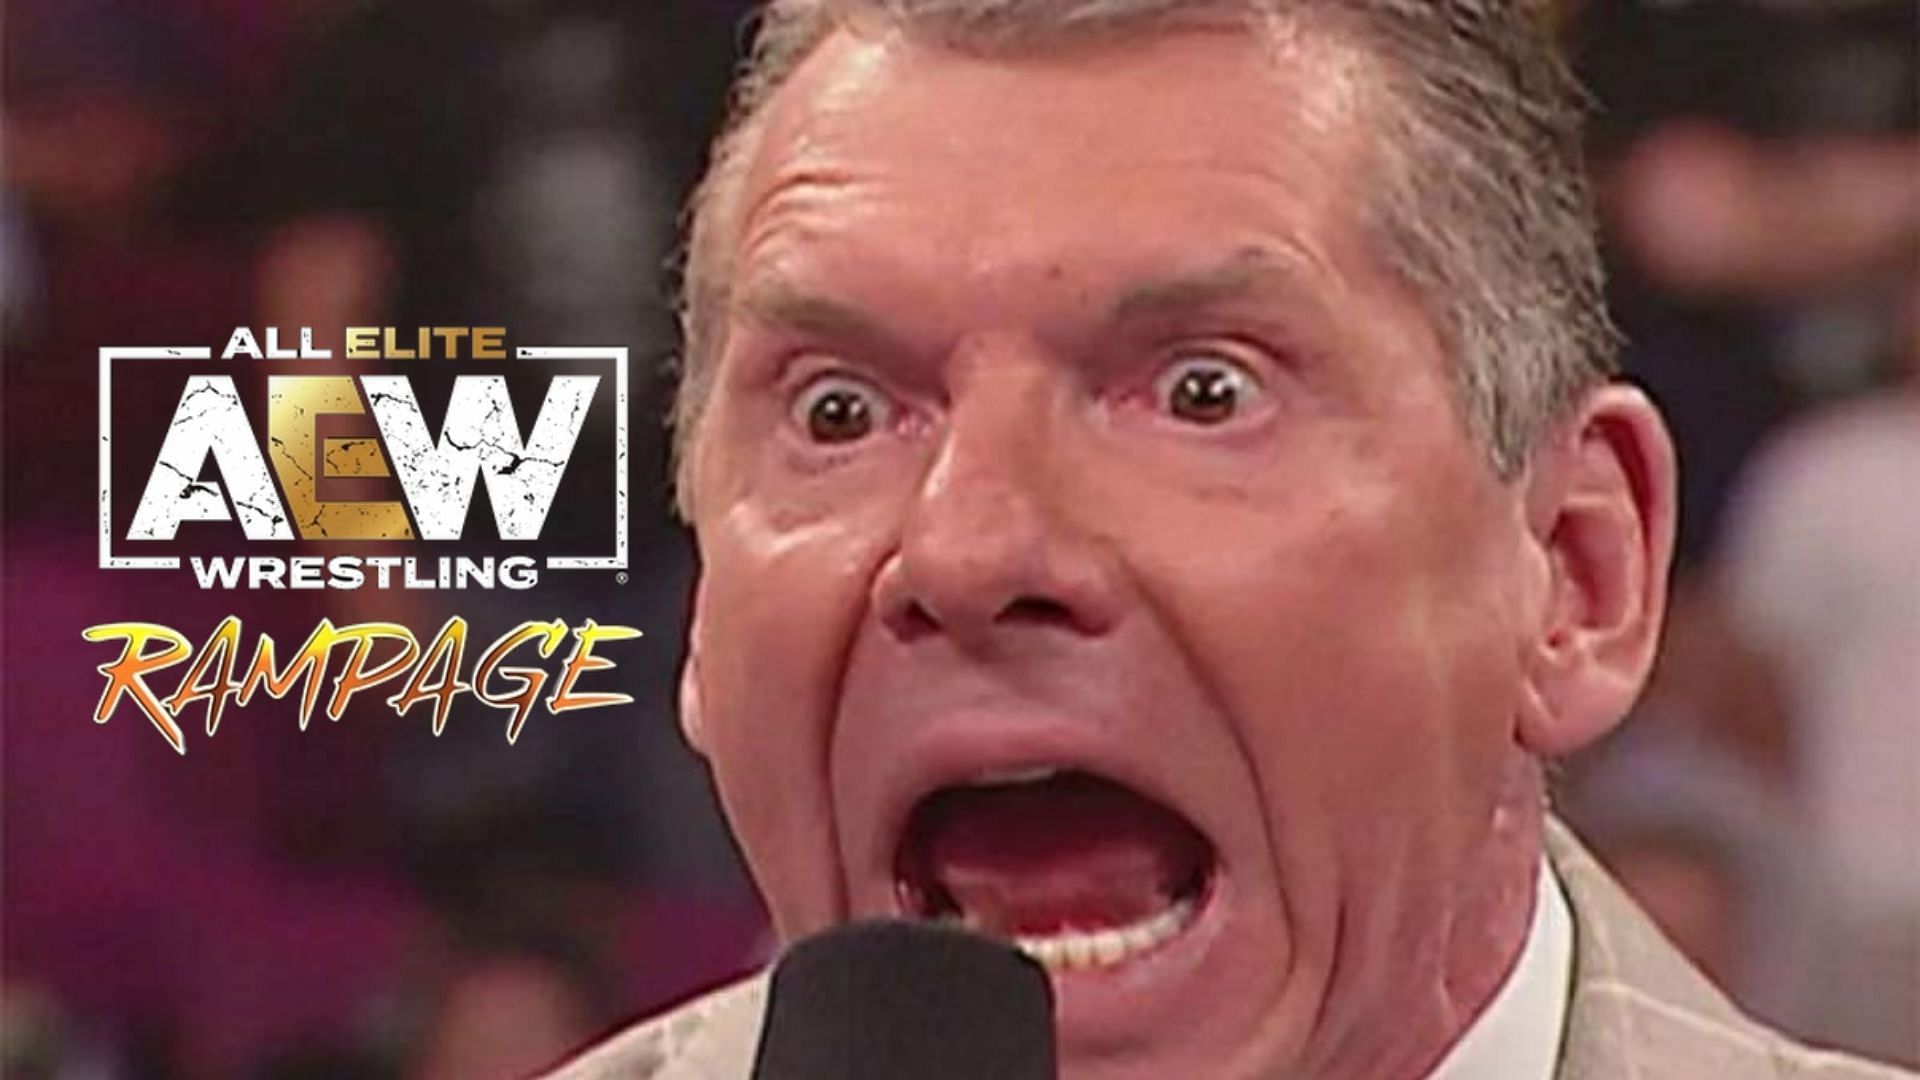 Which AEW star poked fun at Vince McMahon on Rampage?